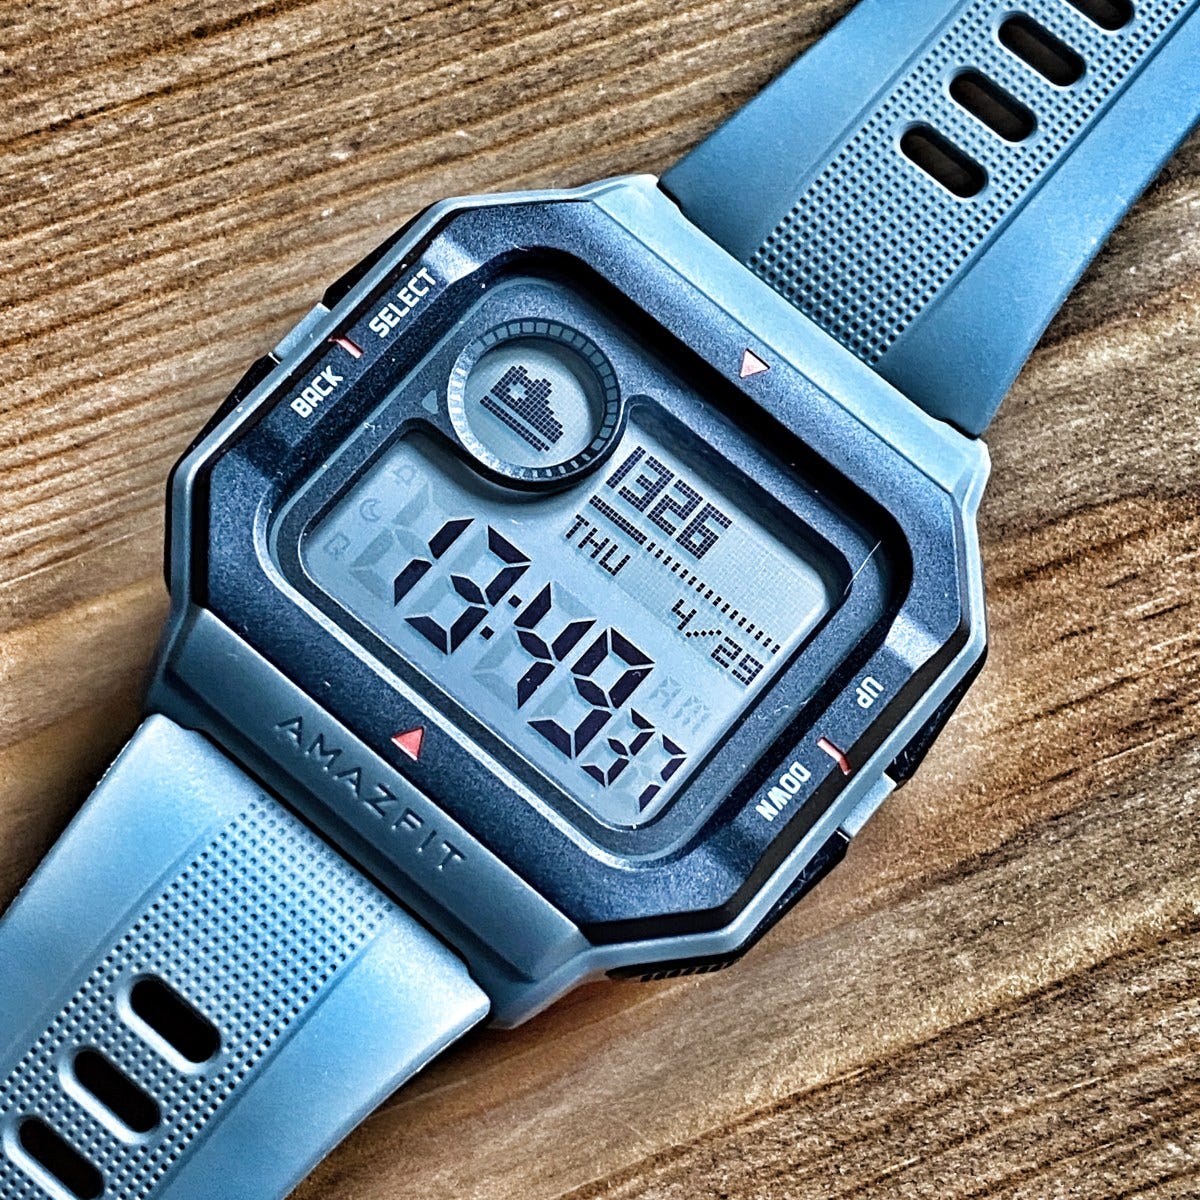 AmazFit Neo review. The AmazFit Neo costs £29.99 (using a…, by Shaun  McGill